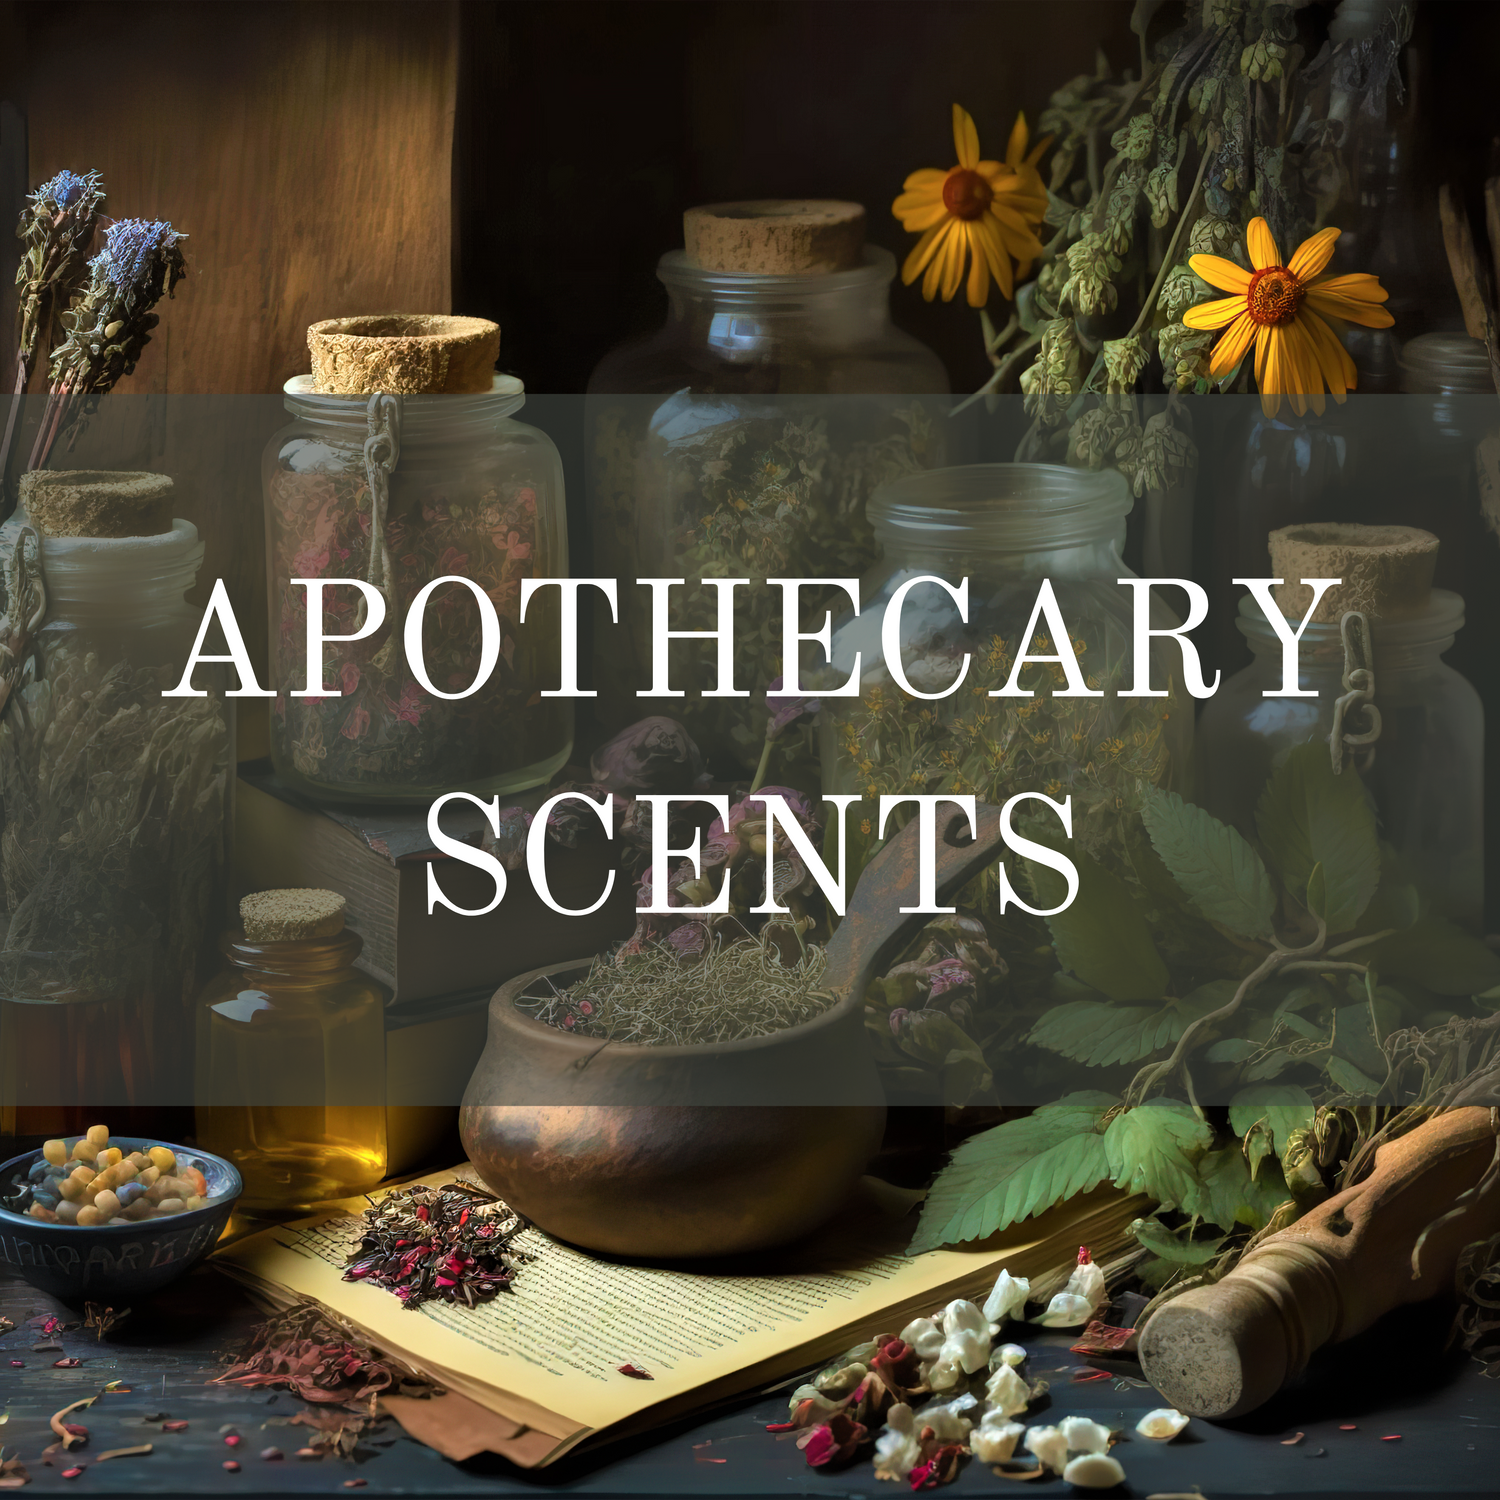 Apothecary Scents